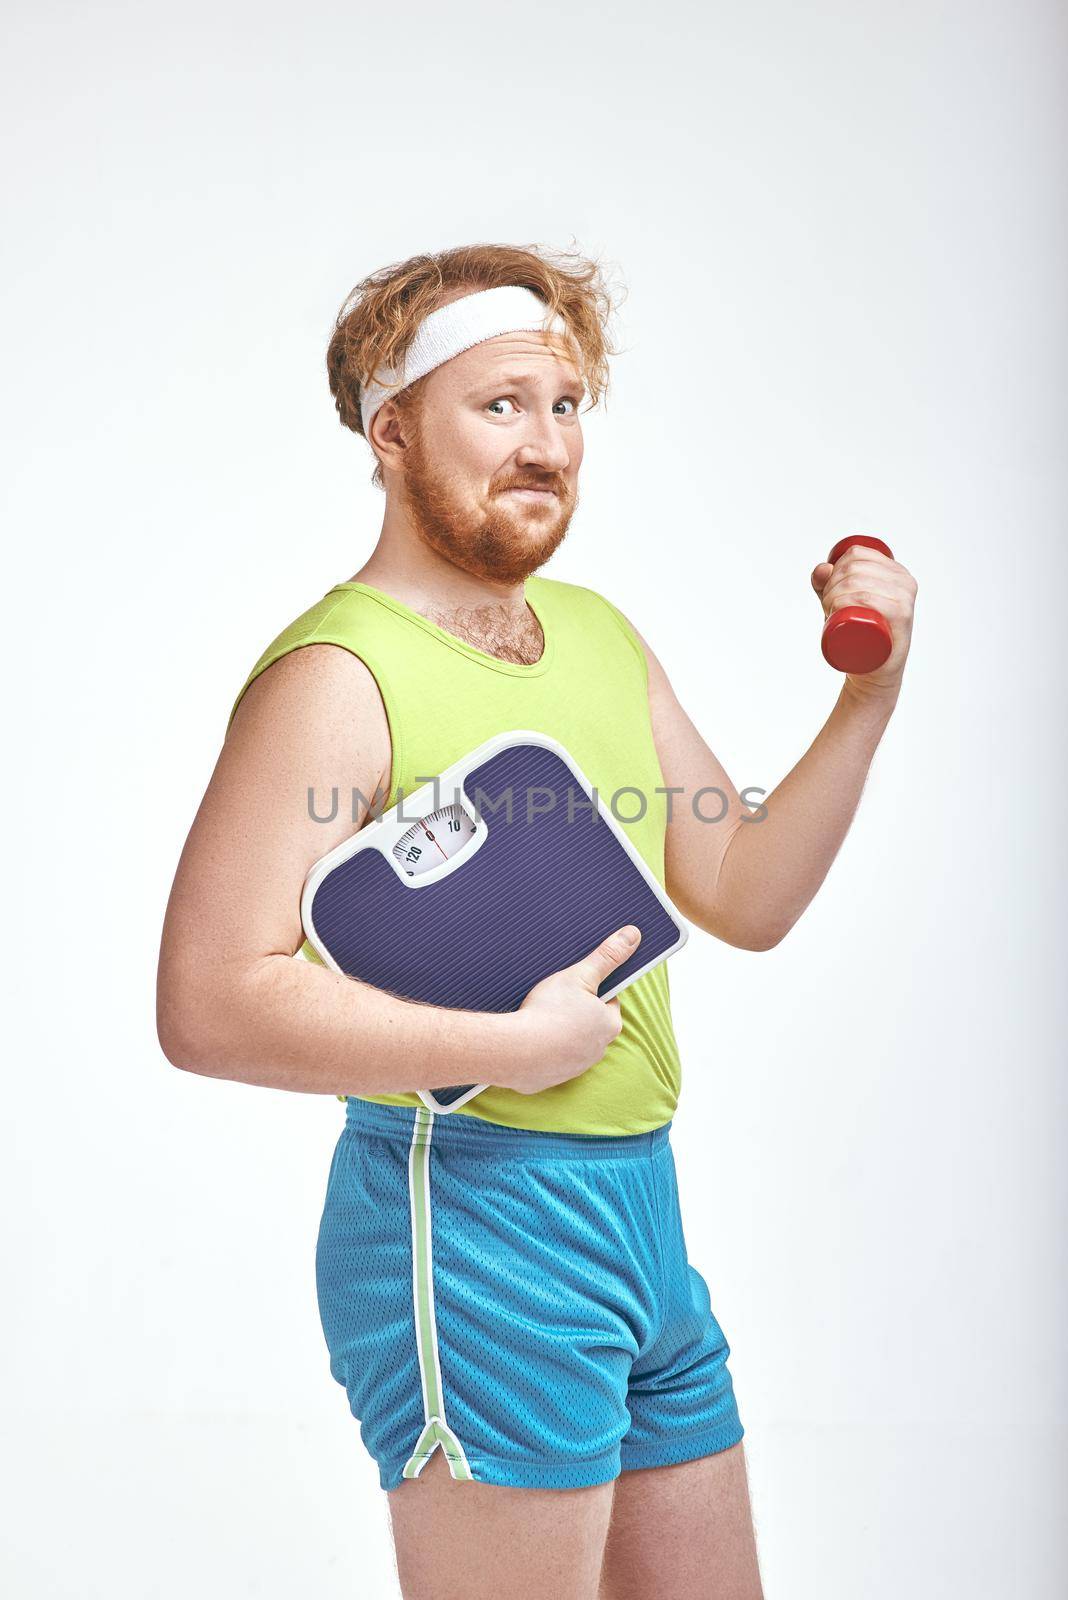 Funny picture of red haired, bearded, plump man on white background. Man holding a dumbbell and scales